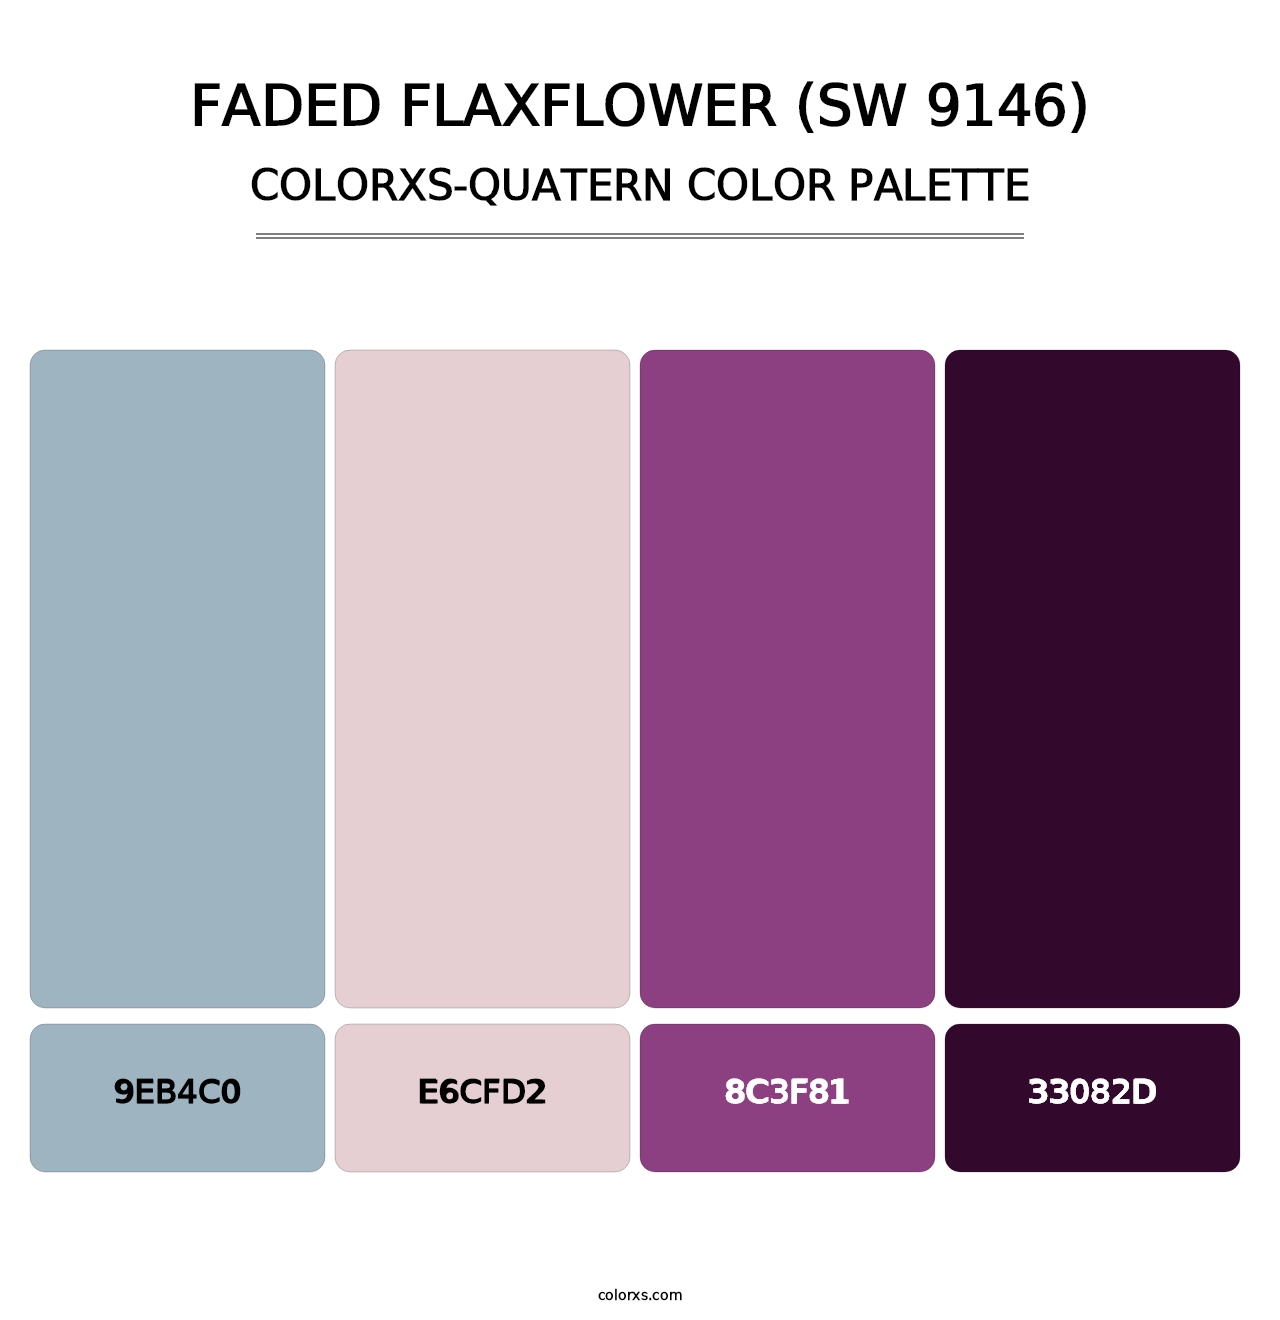 Faded Flaxflower (SW 9146) - Colorxs Quatern Palette